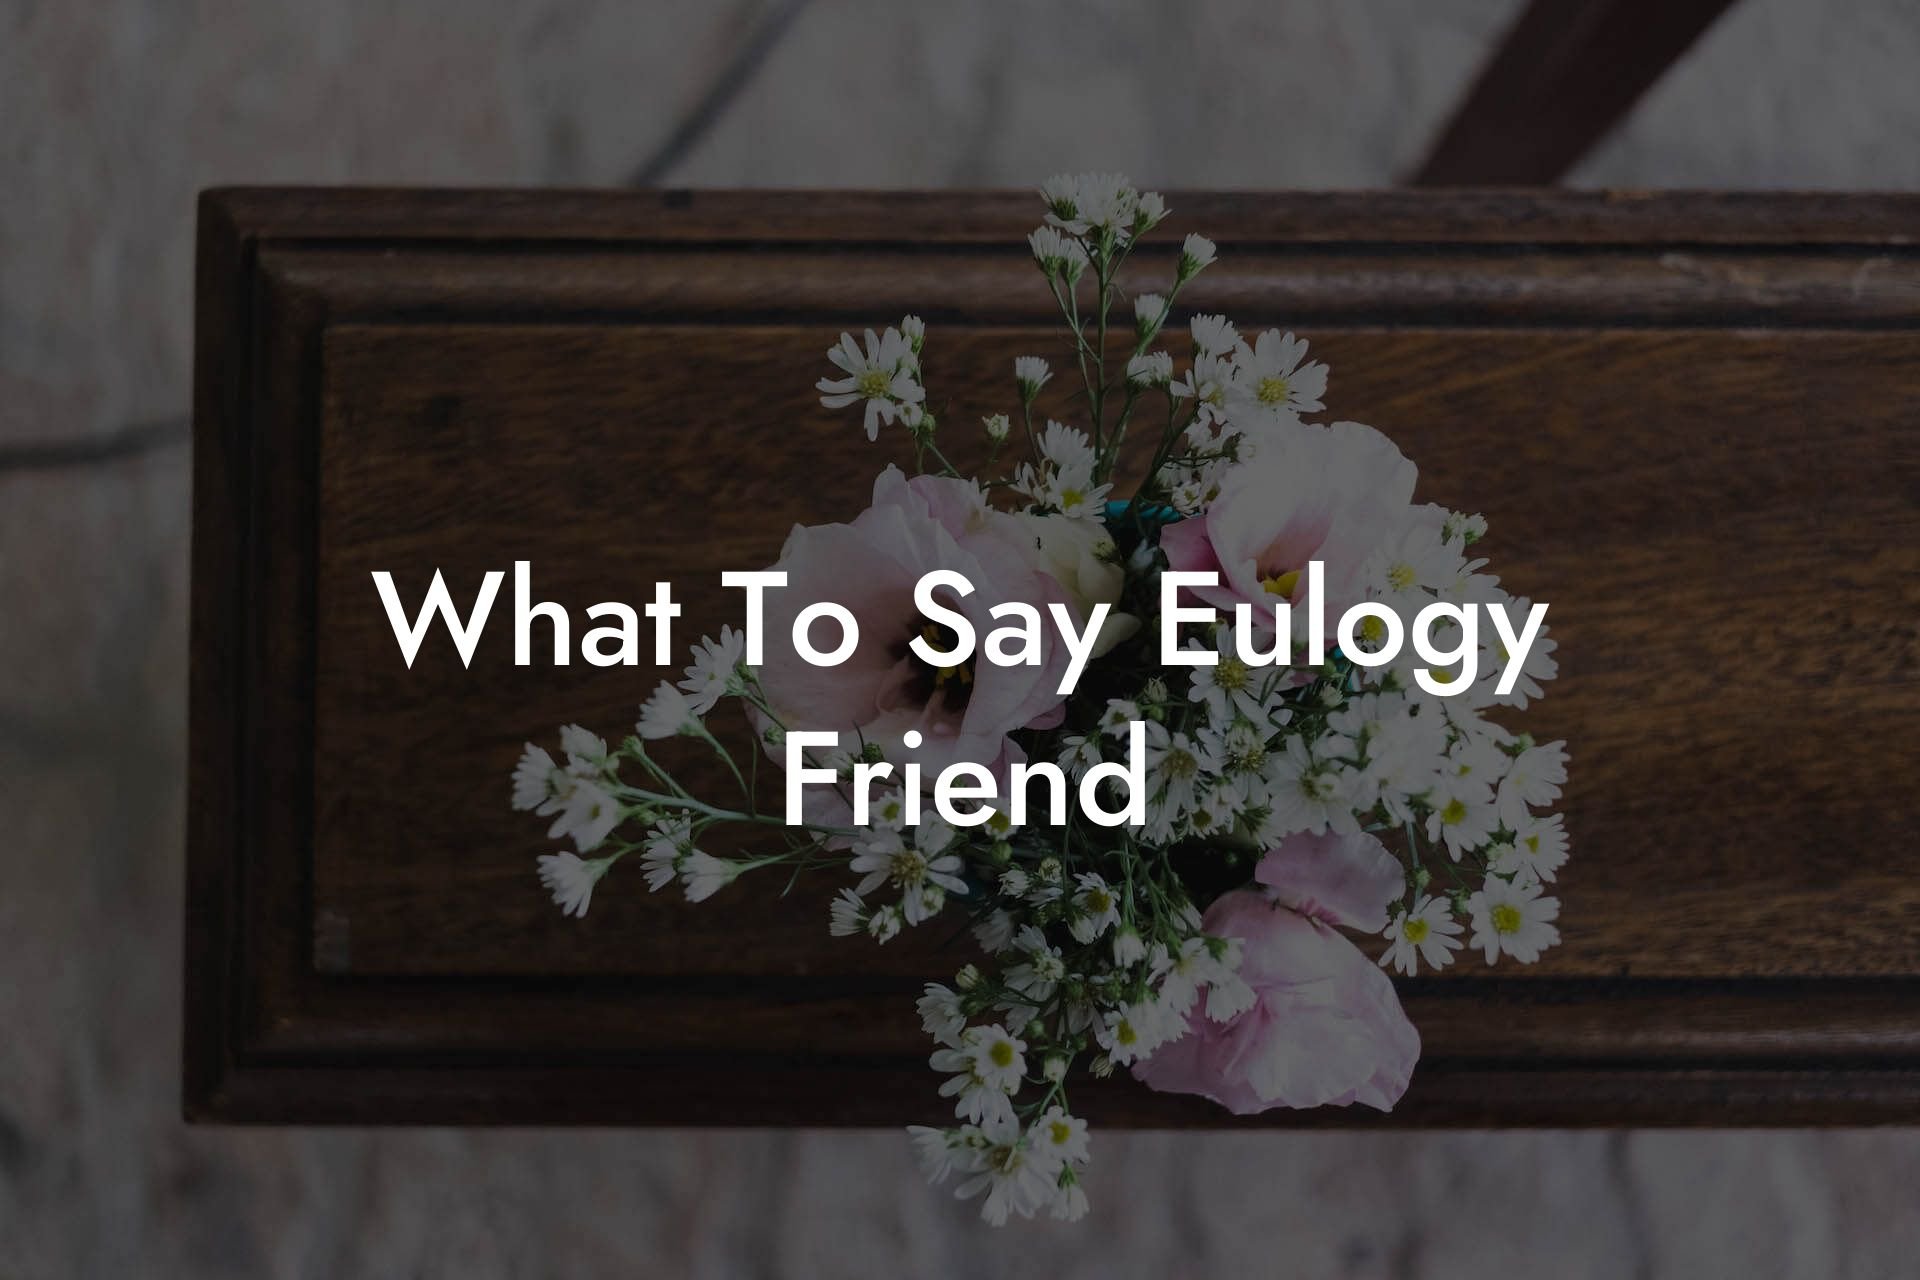 What To Say Eulogy Friend